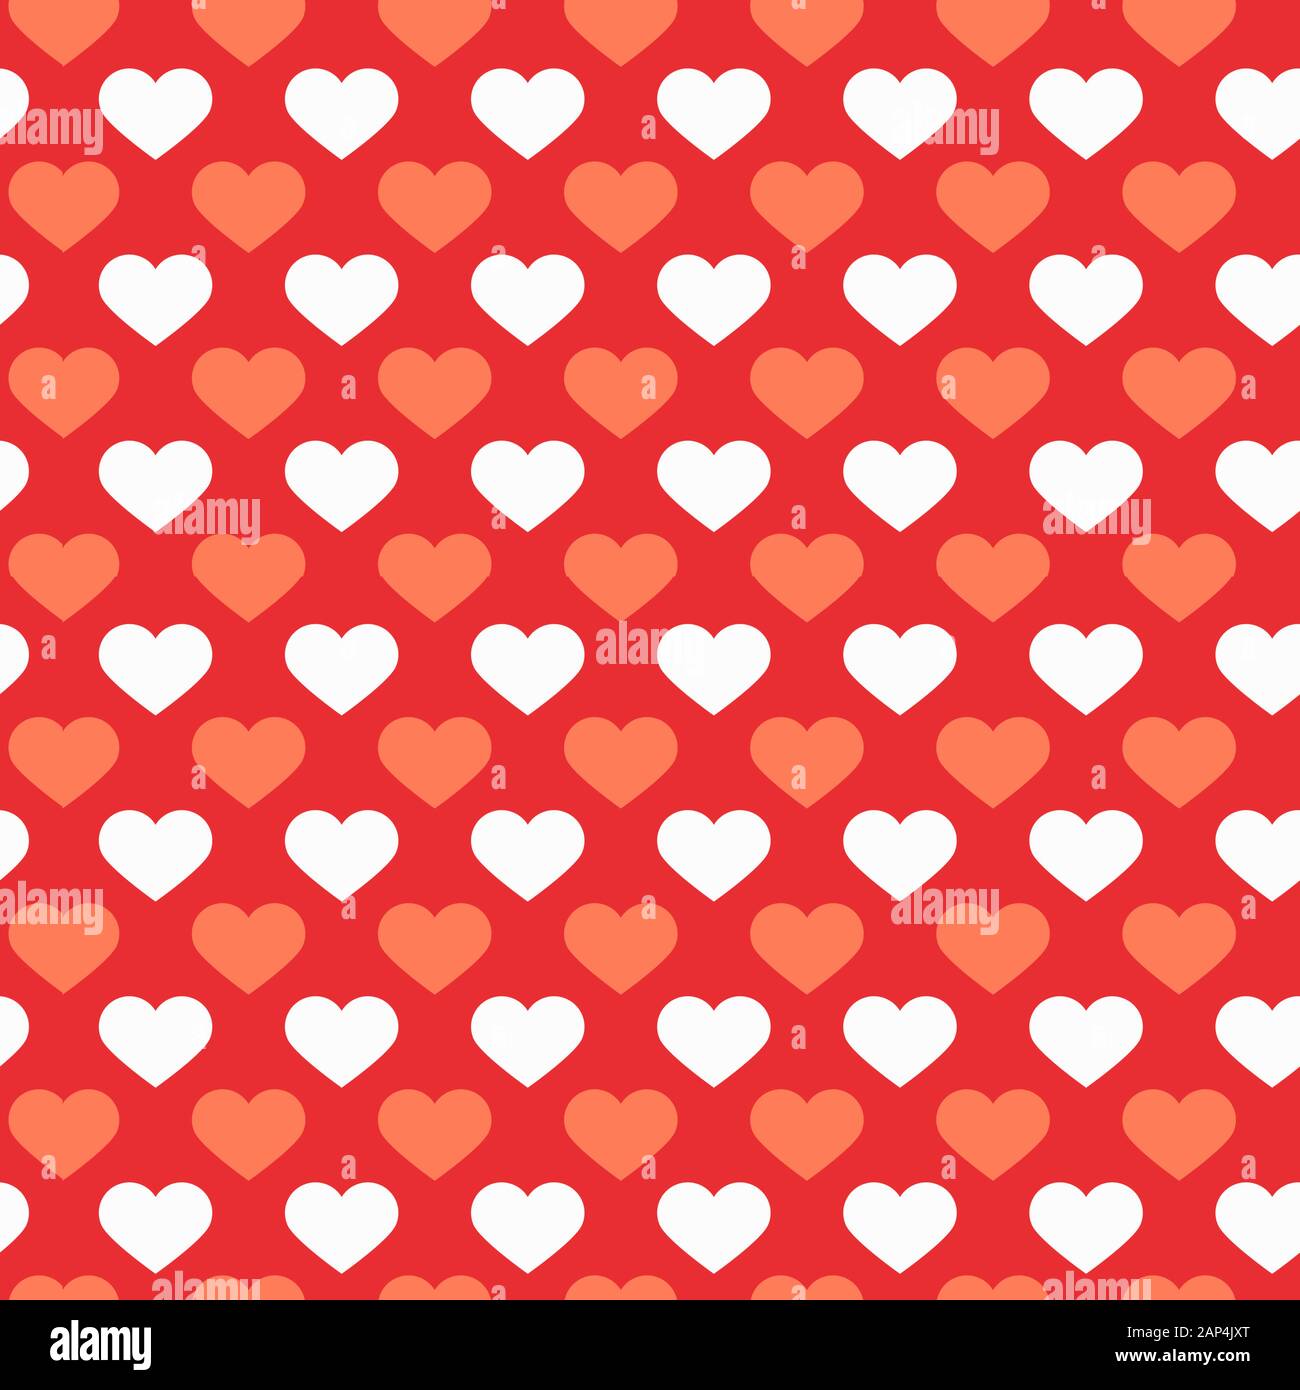 Seamless patterns with pink and white hearts, polka dot. Seamless background with hearts. Valentine's Day. Gift wrap, print, cloth, cute background fo Stock Photo